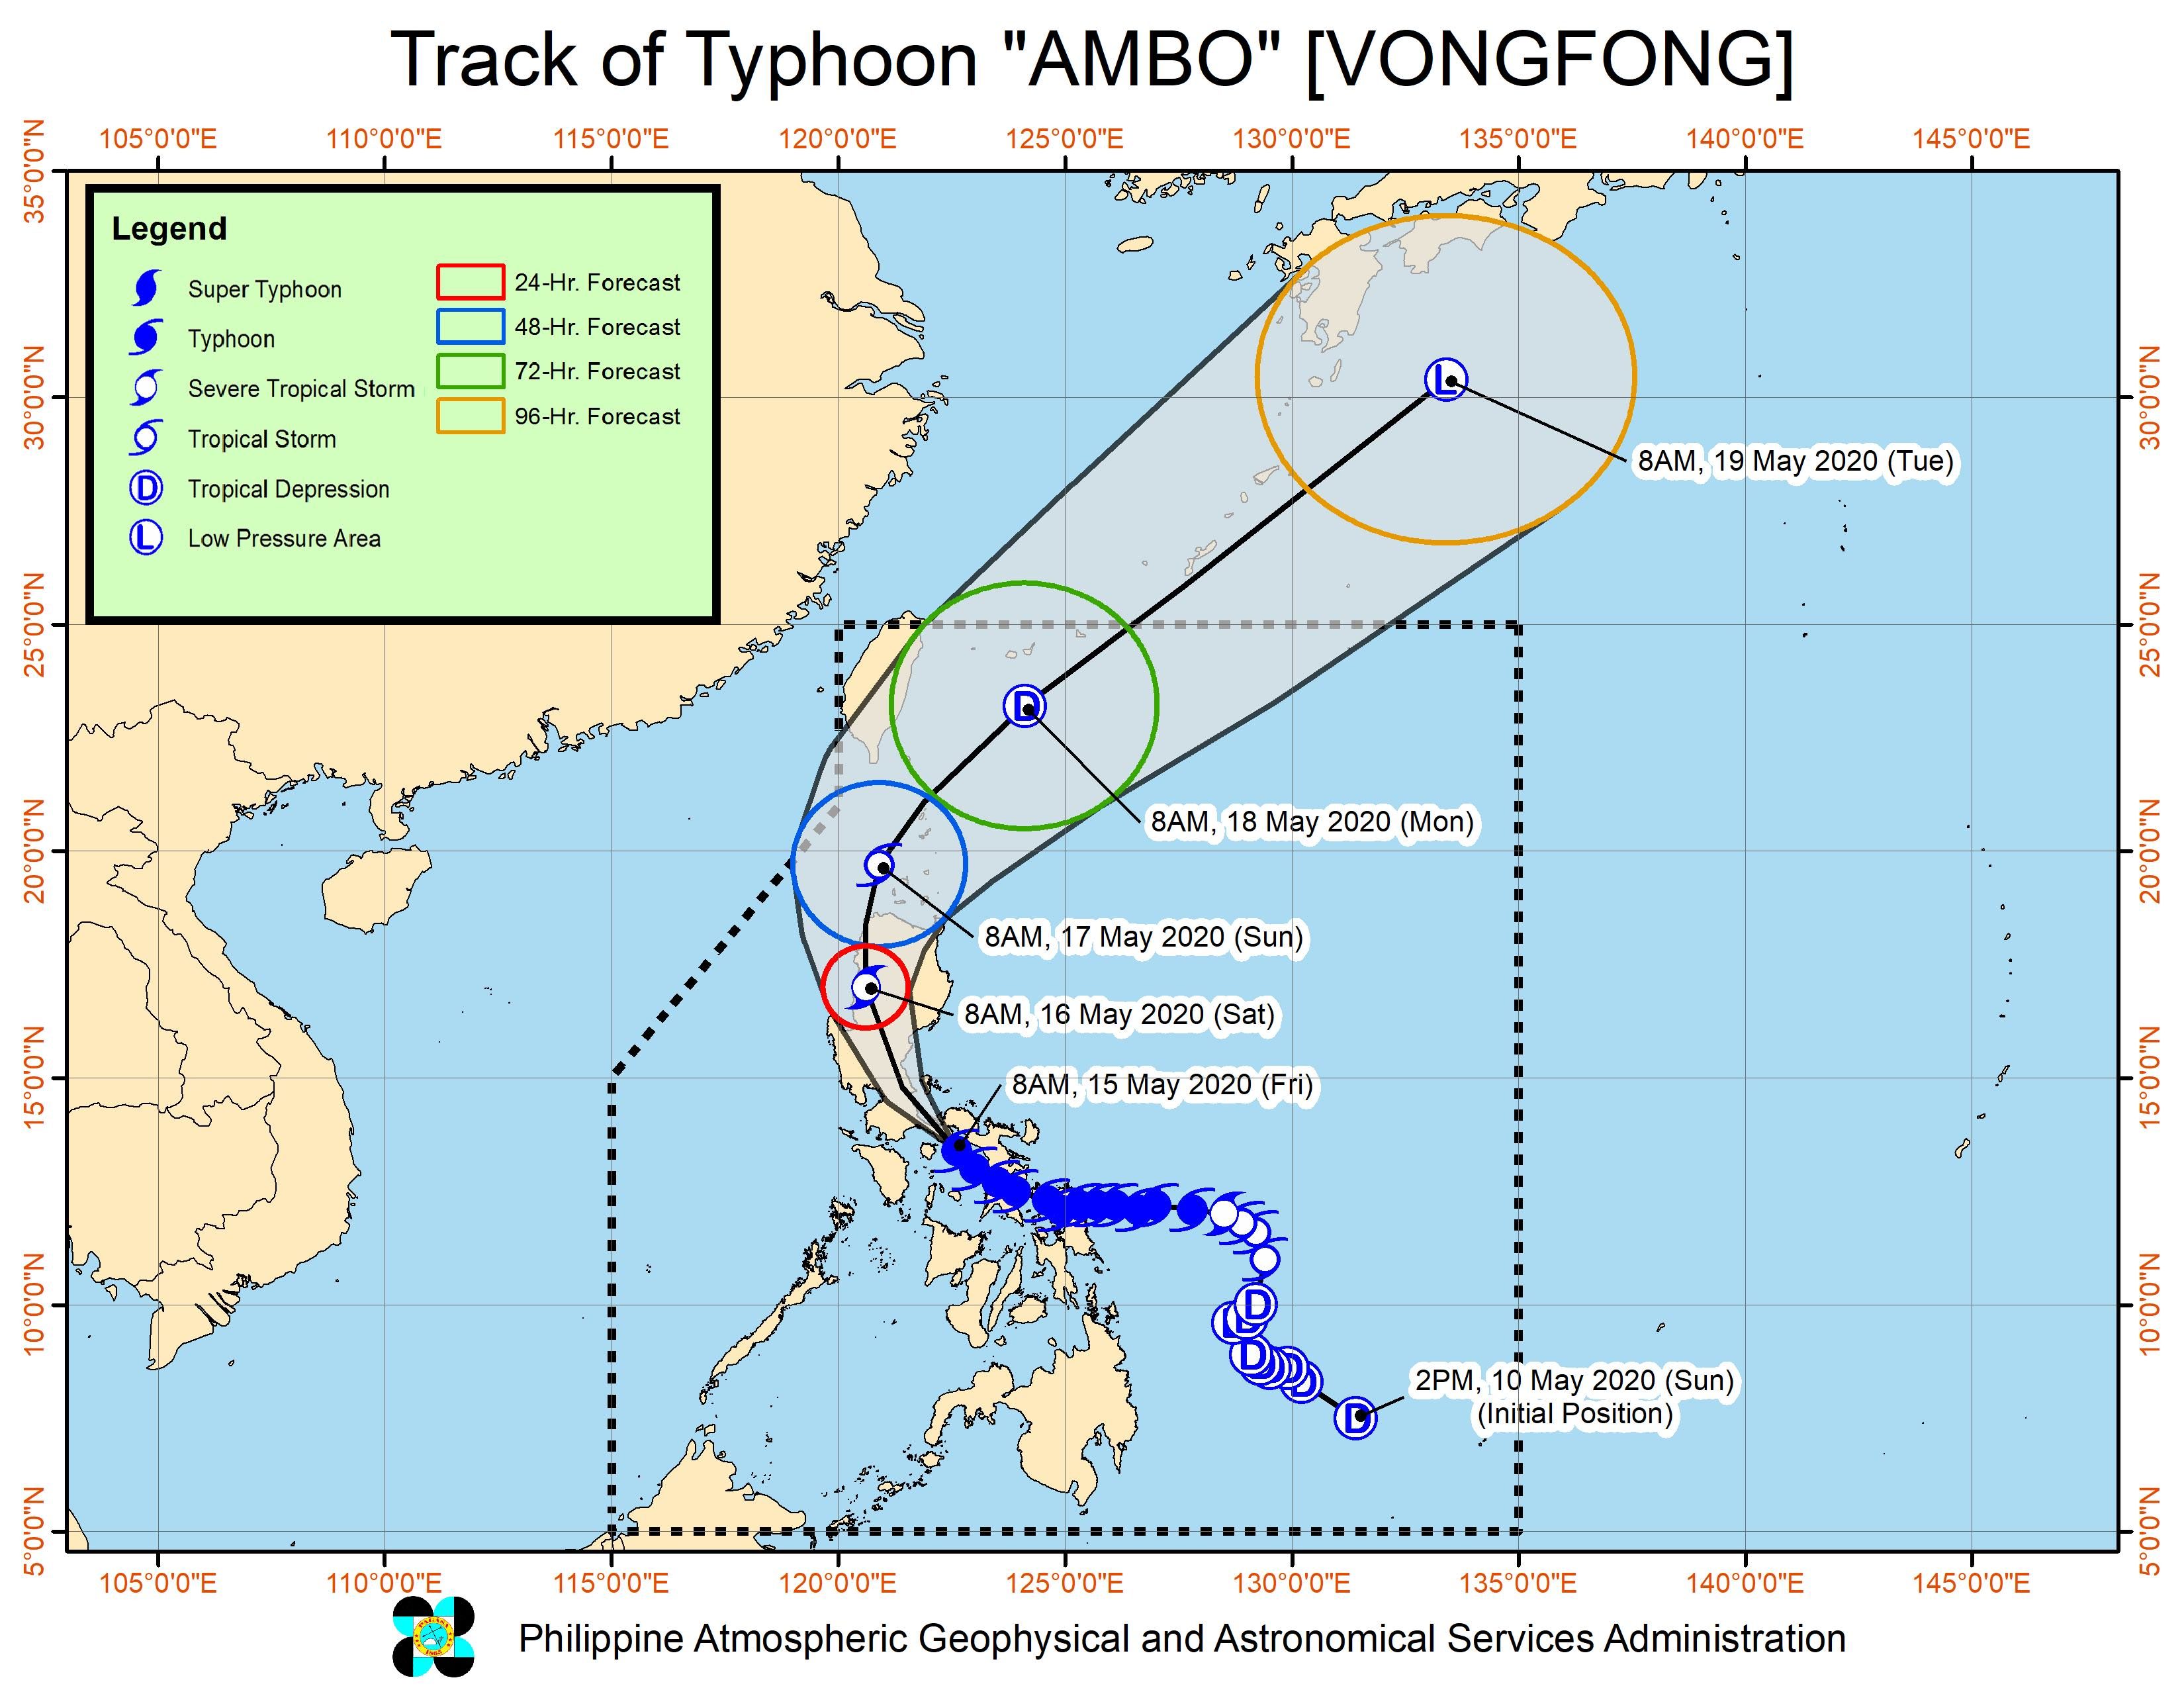 Forecast track of Typhoon Ambo (Vongfong) as of May 15, 2020, 11 am. Image from PAGASA 